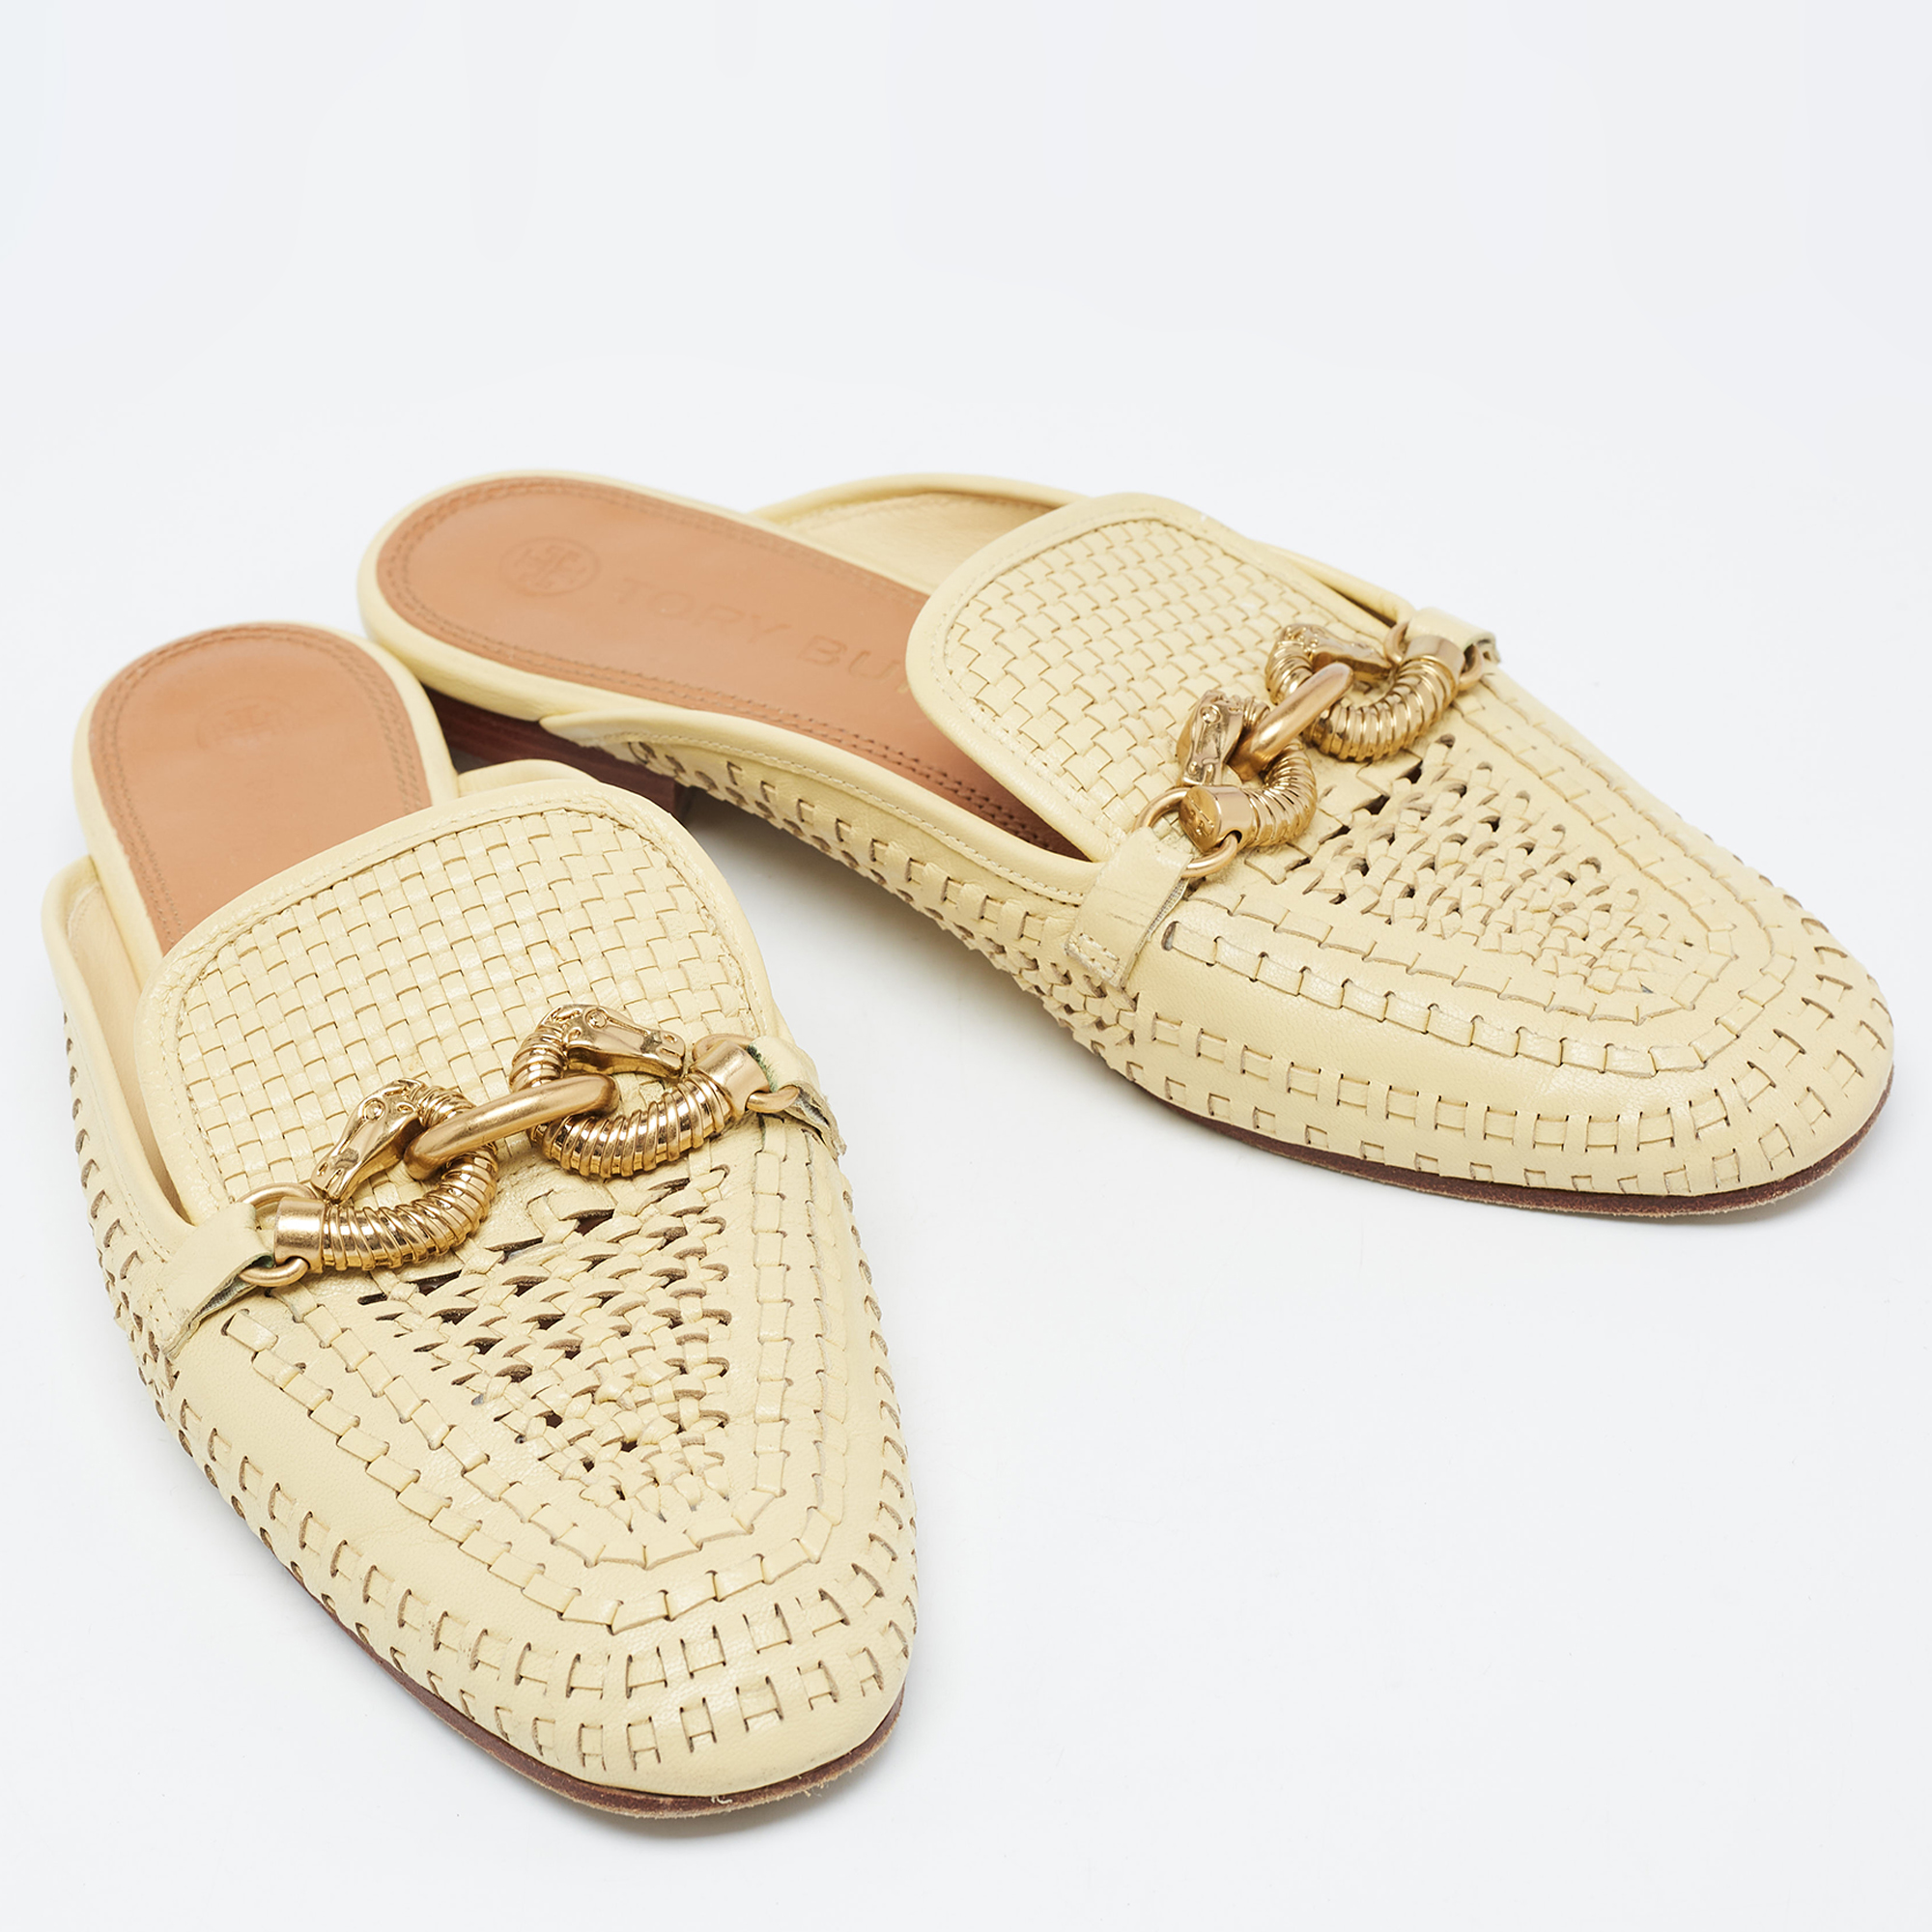 Tory Burch Yellow Woven Leather Loafer Mules Size 38.5